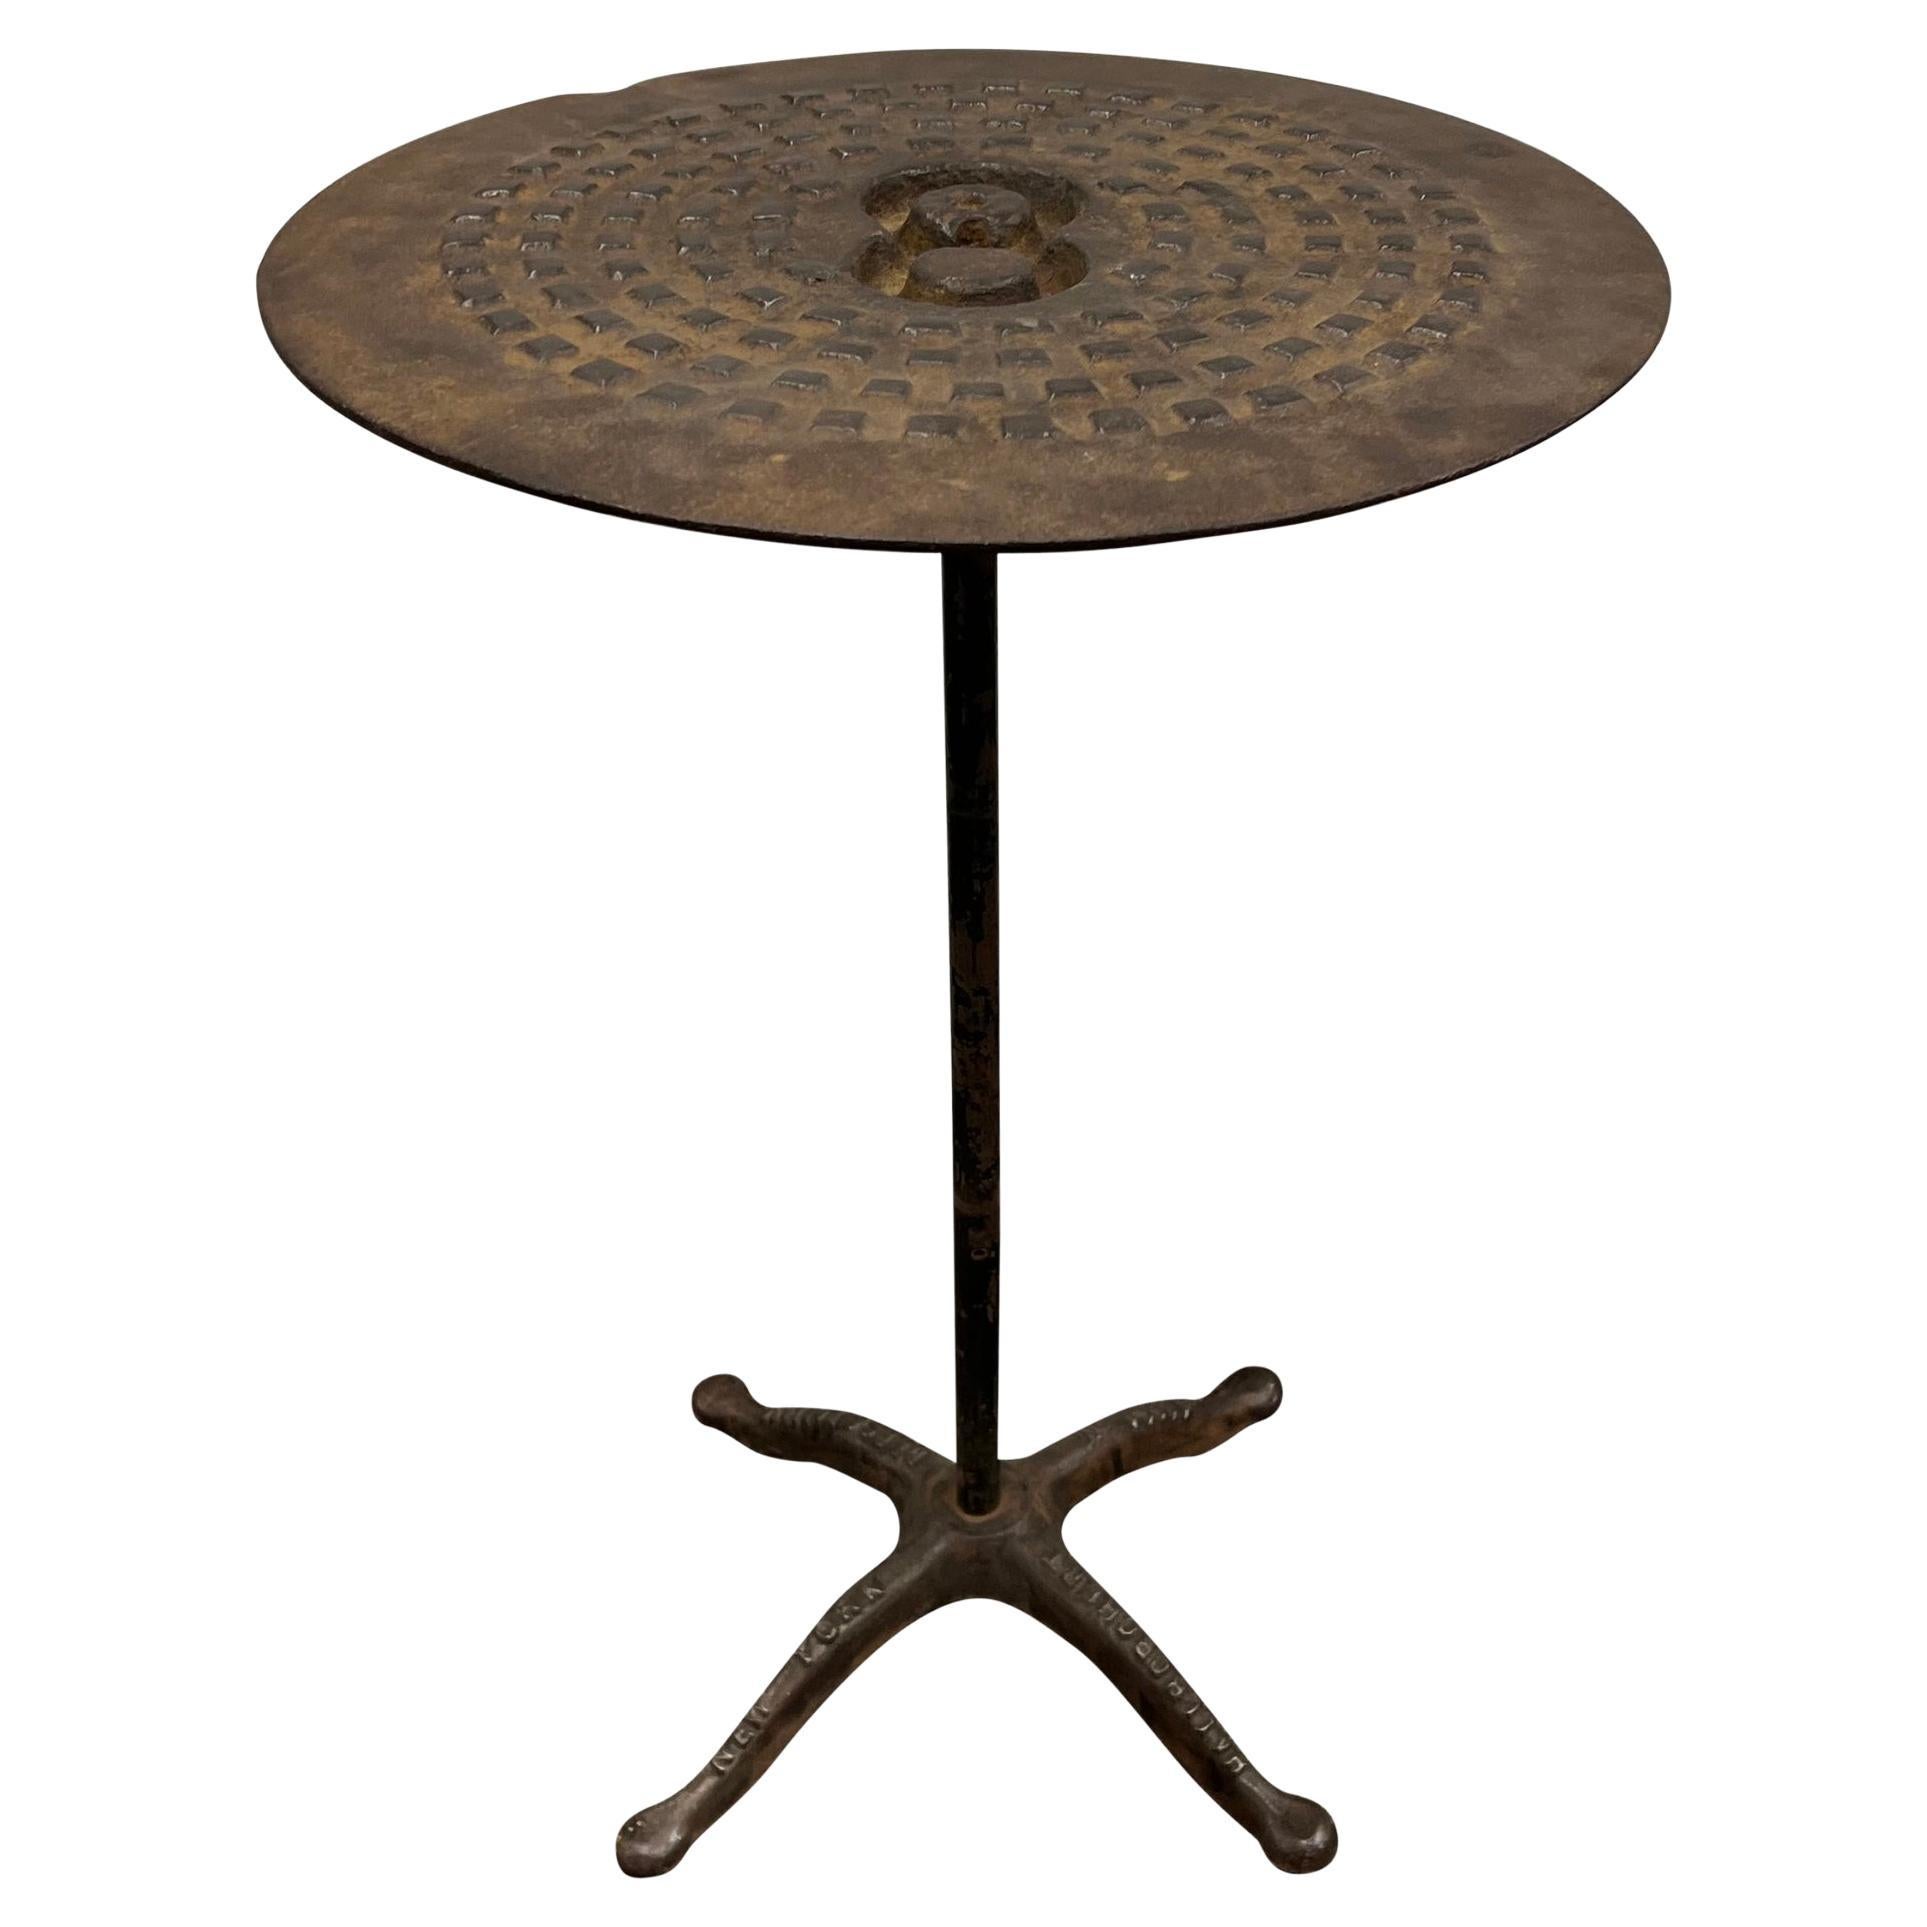 New York City Manhole Cover Table For Sale